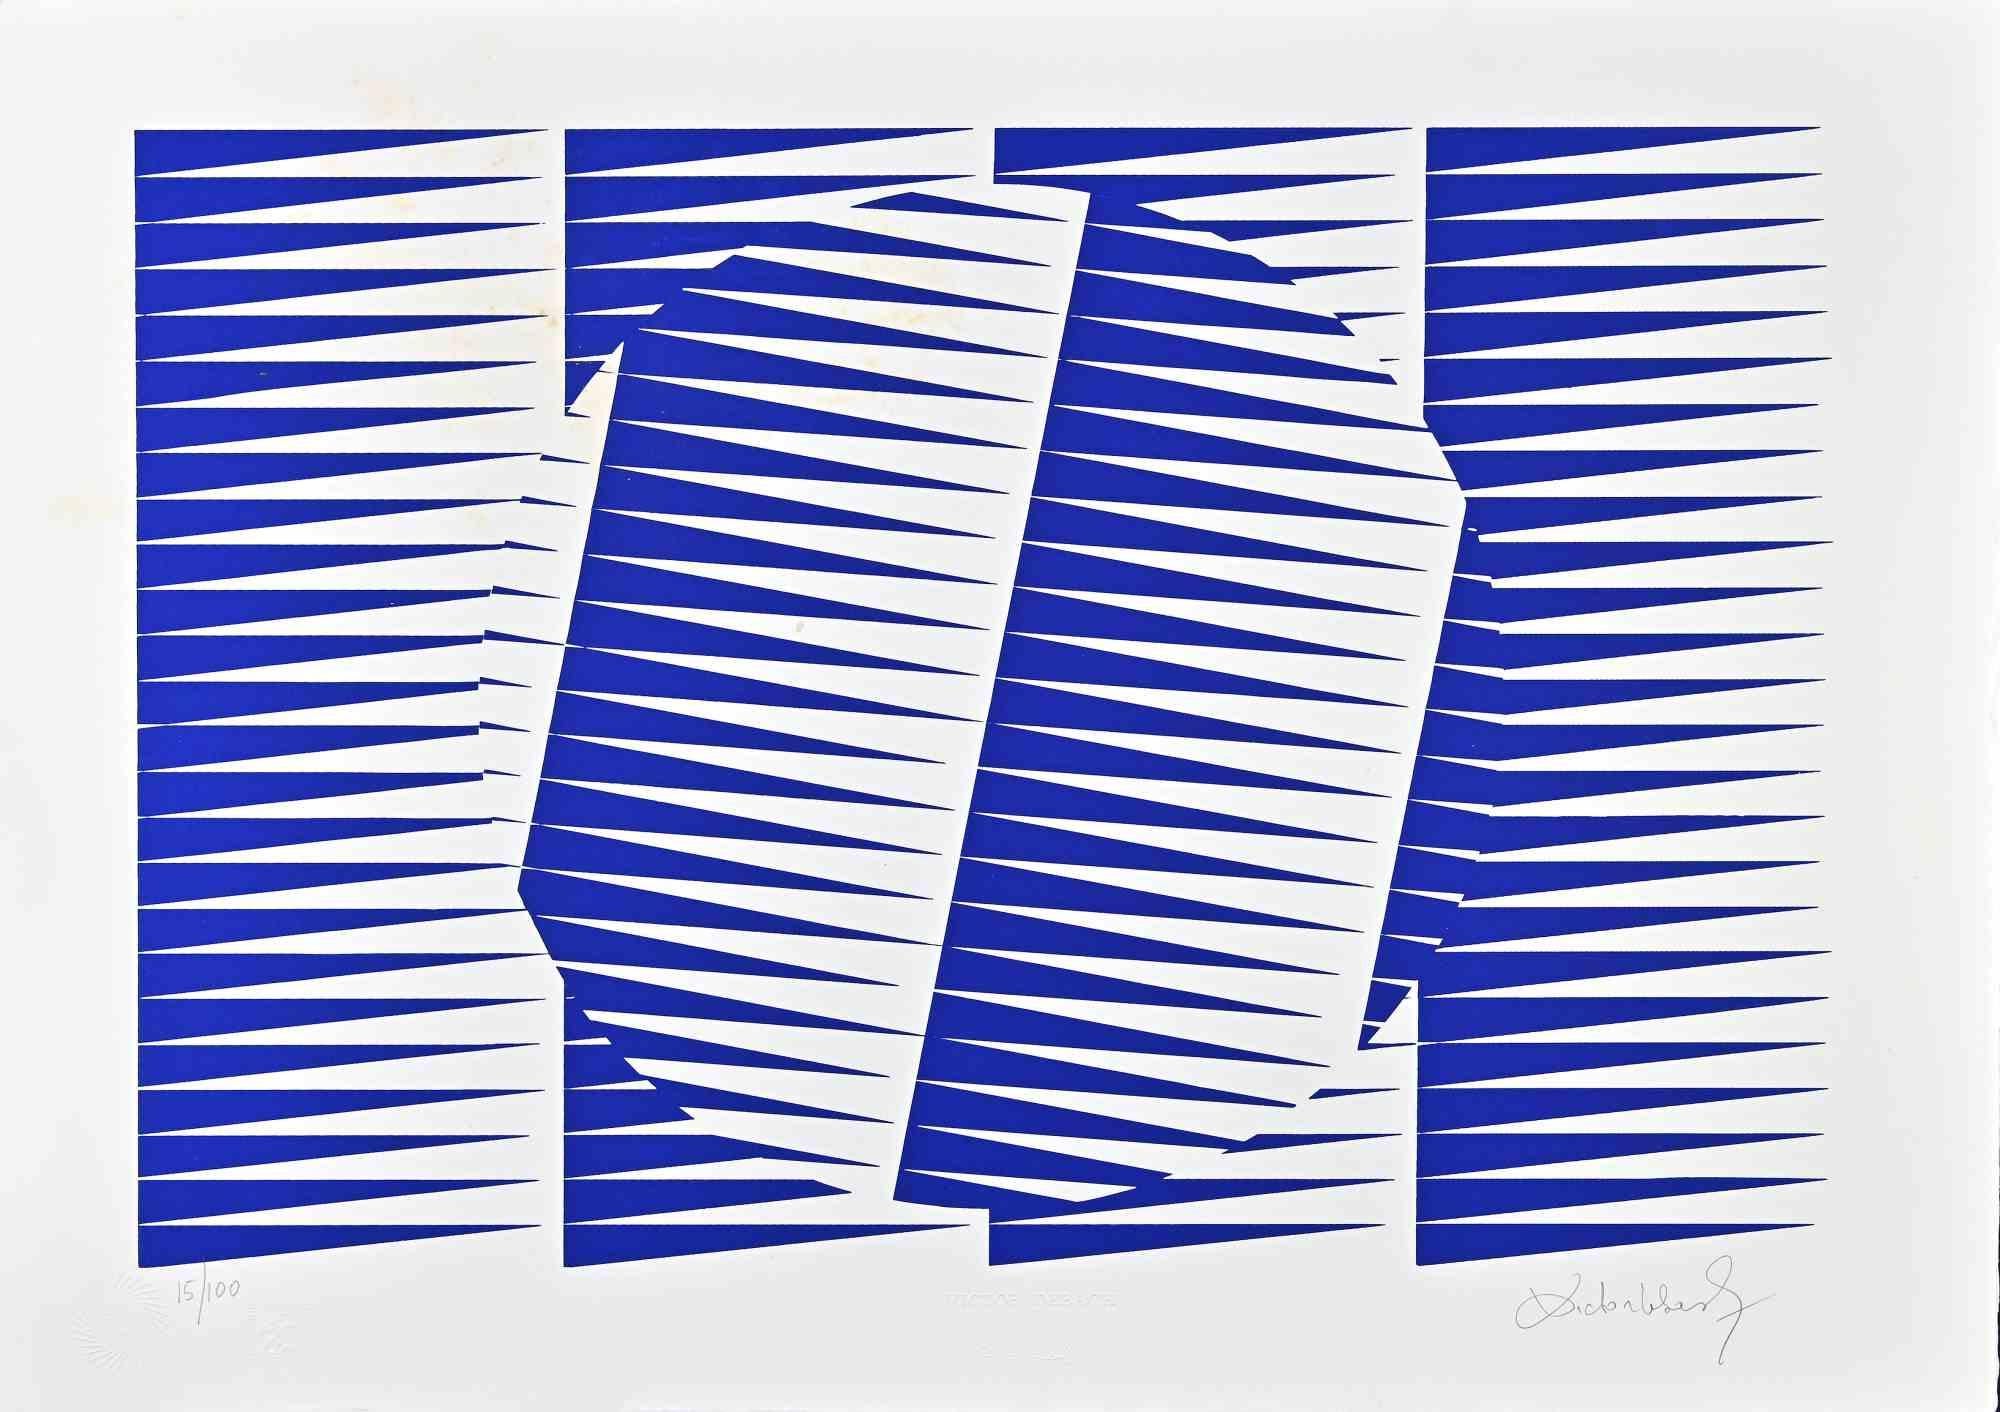 Abstract Electric Blue Composition is aScreen Print on Paper realized by Victor Debach in 1970s.

Limited edition of 100 copies numbered and signed by the artist with pencil on the lower margin.

Very good condition on a white cardboard.